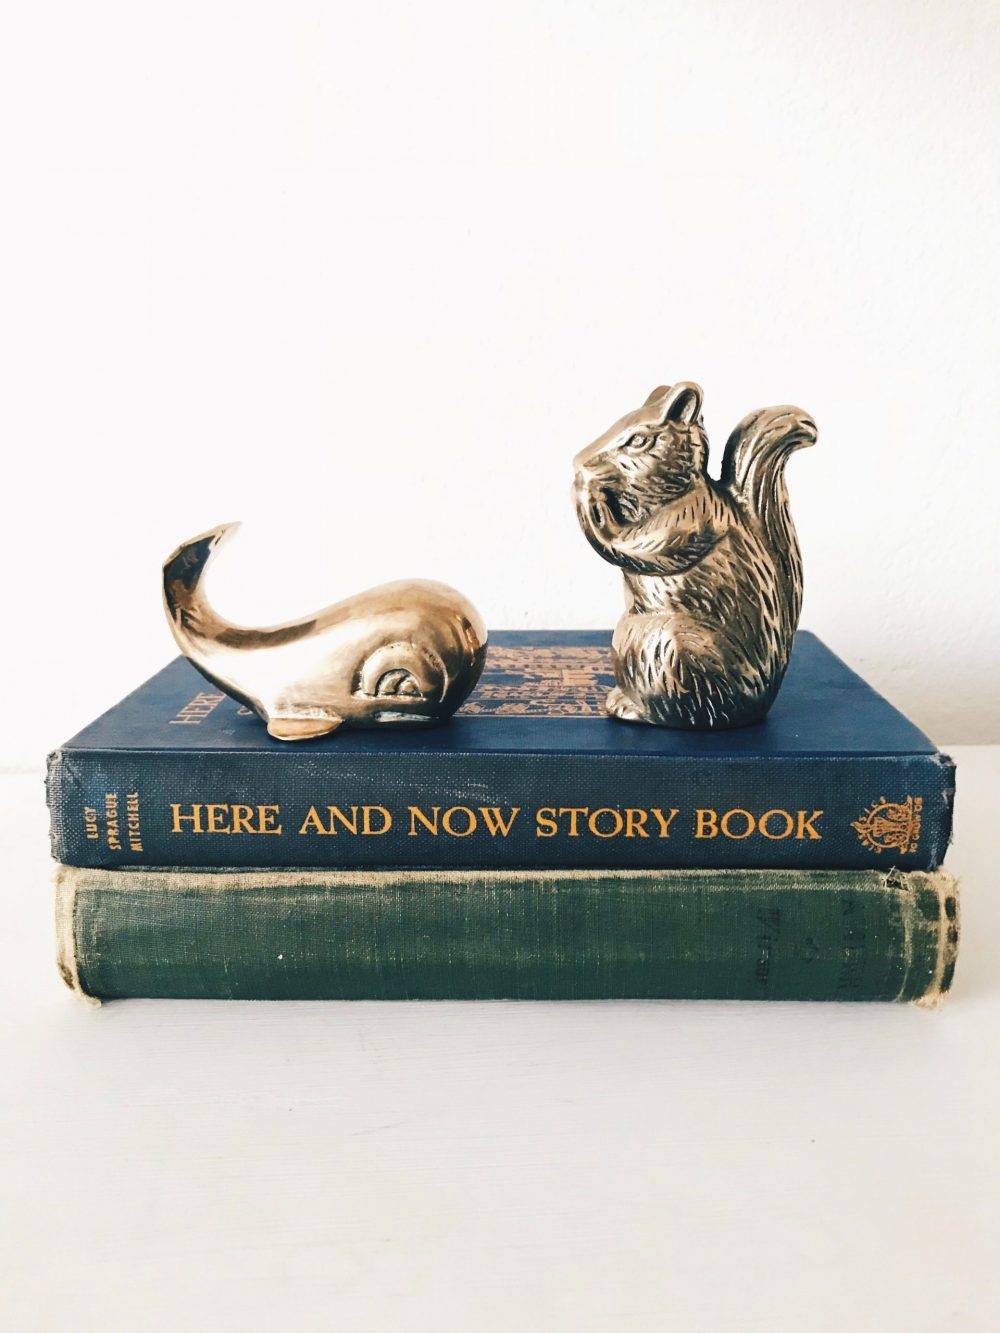 A pair of small brass figurines, a squirrel and a whale, sit atop a couple vintage books - one green with a worn spine and one navy blue with gold lettering on its spine.